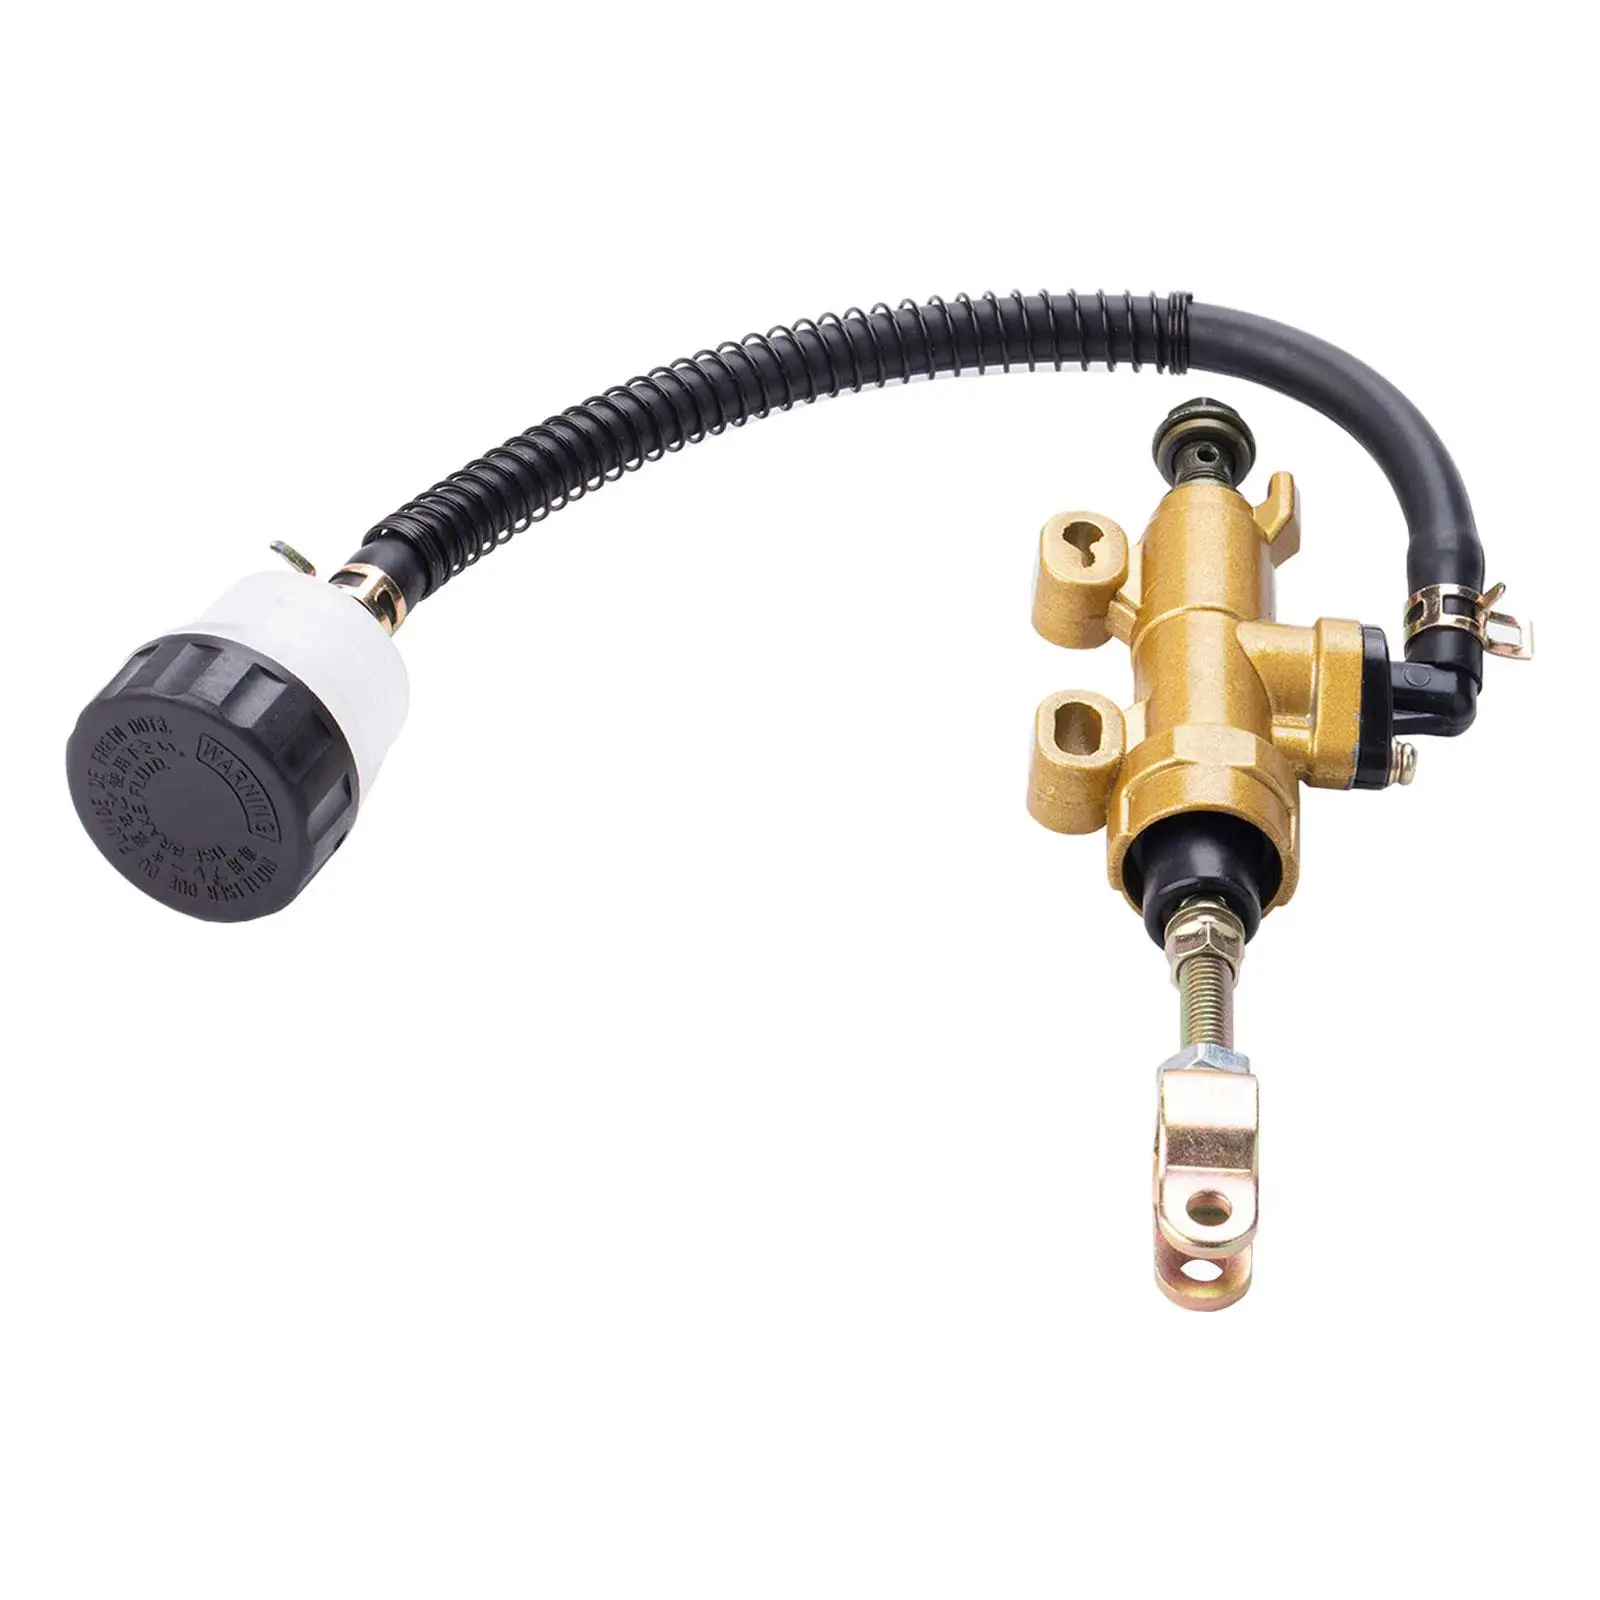 Motorcycle Rear Foot Master Cylinder Brake Pump ,Aluminum Alloy for CBR250 400 600 1000 ATV Stable